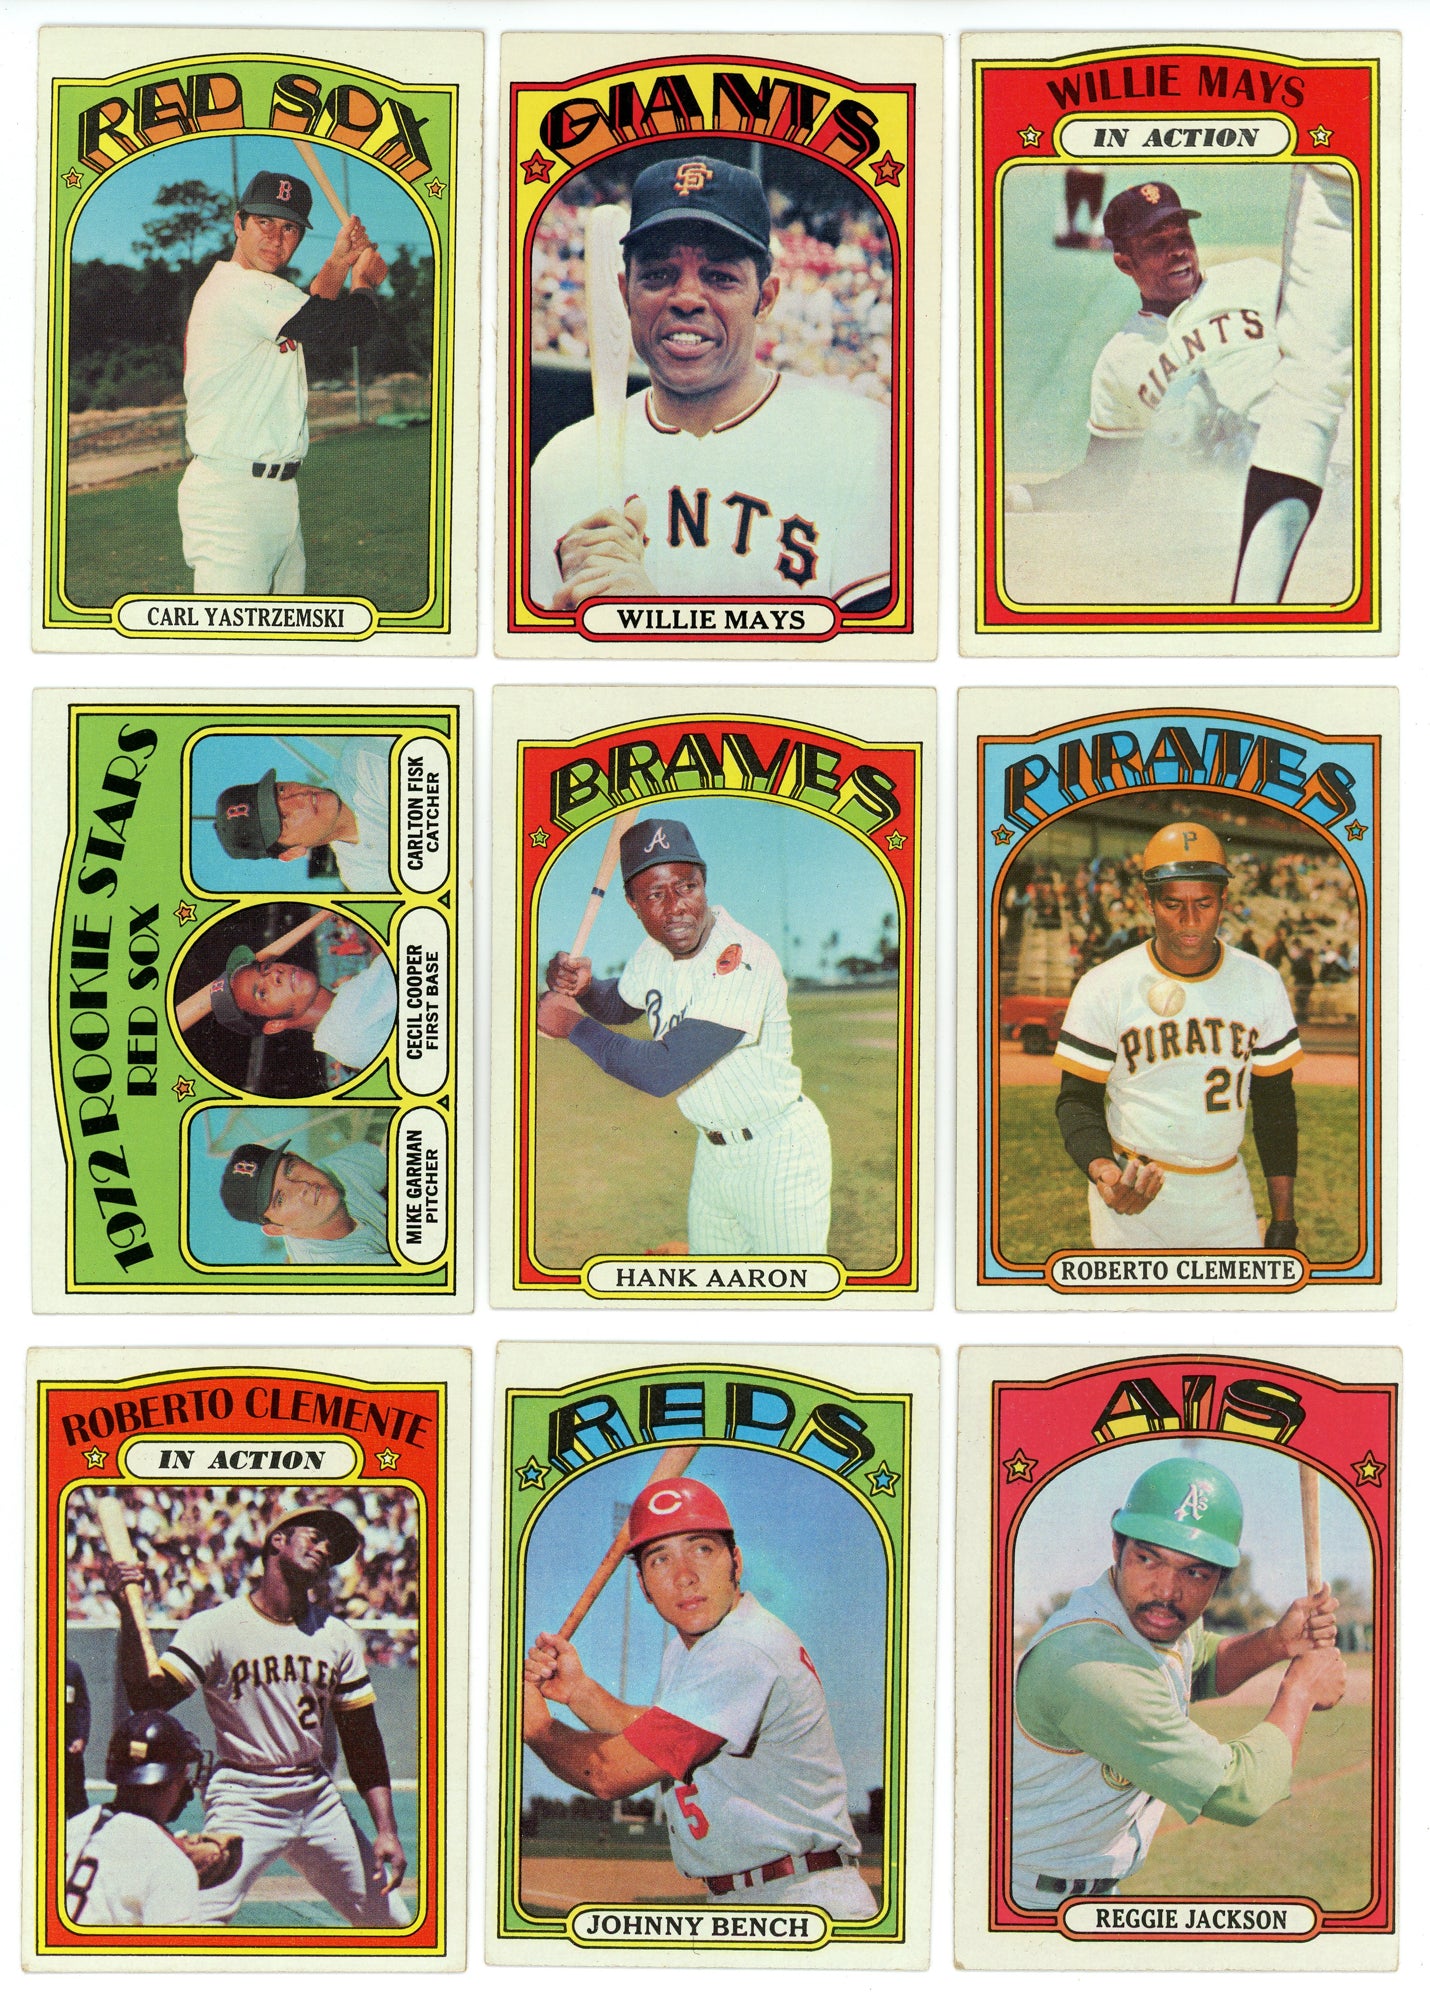 1972 Topps #310 Roberto Clemente In-Action (Pirates)